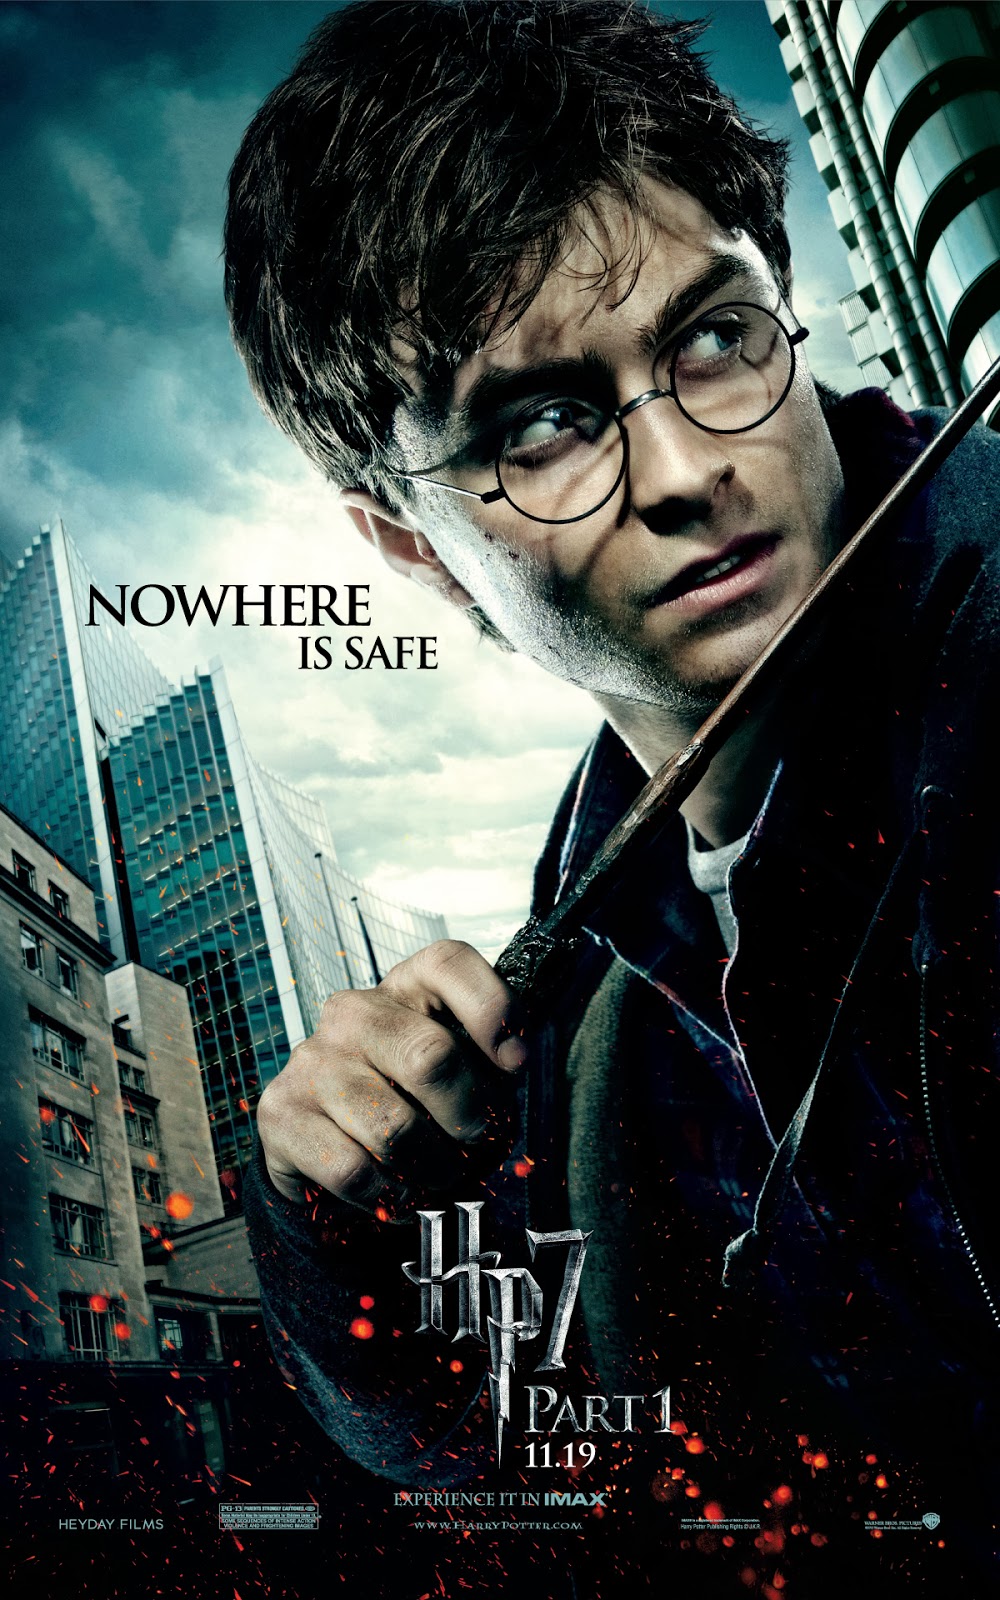 Harry Potter And The Deathly Hallows - Part 1 Dual Audio Hindi 720p